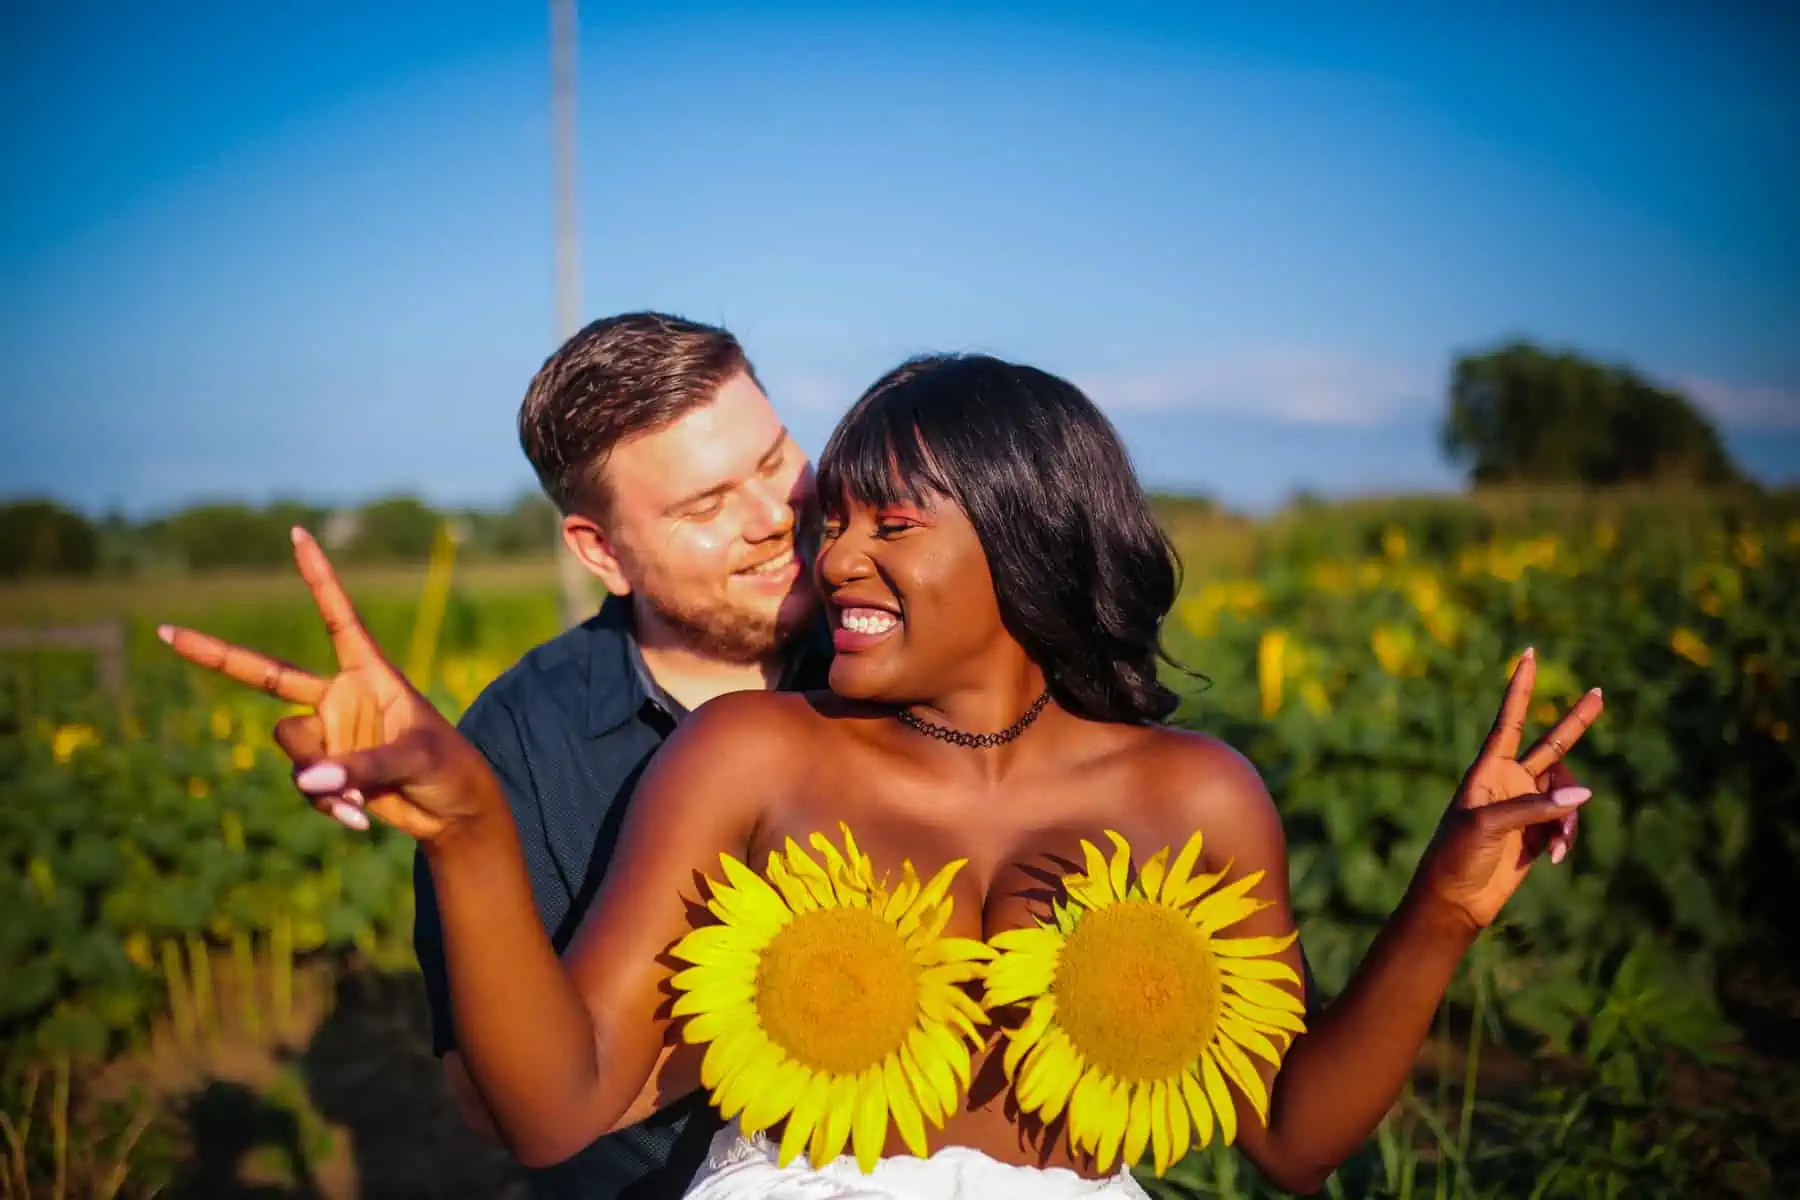 A couple posing in a sunflower field.